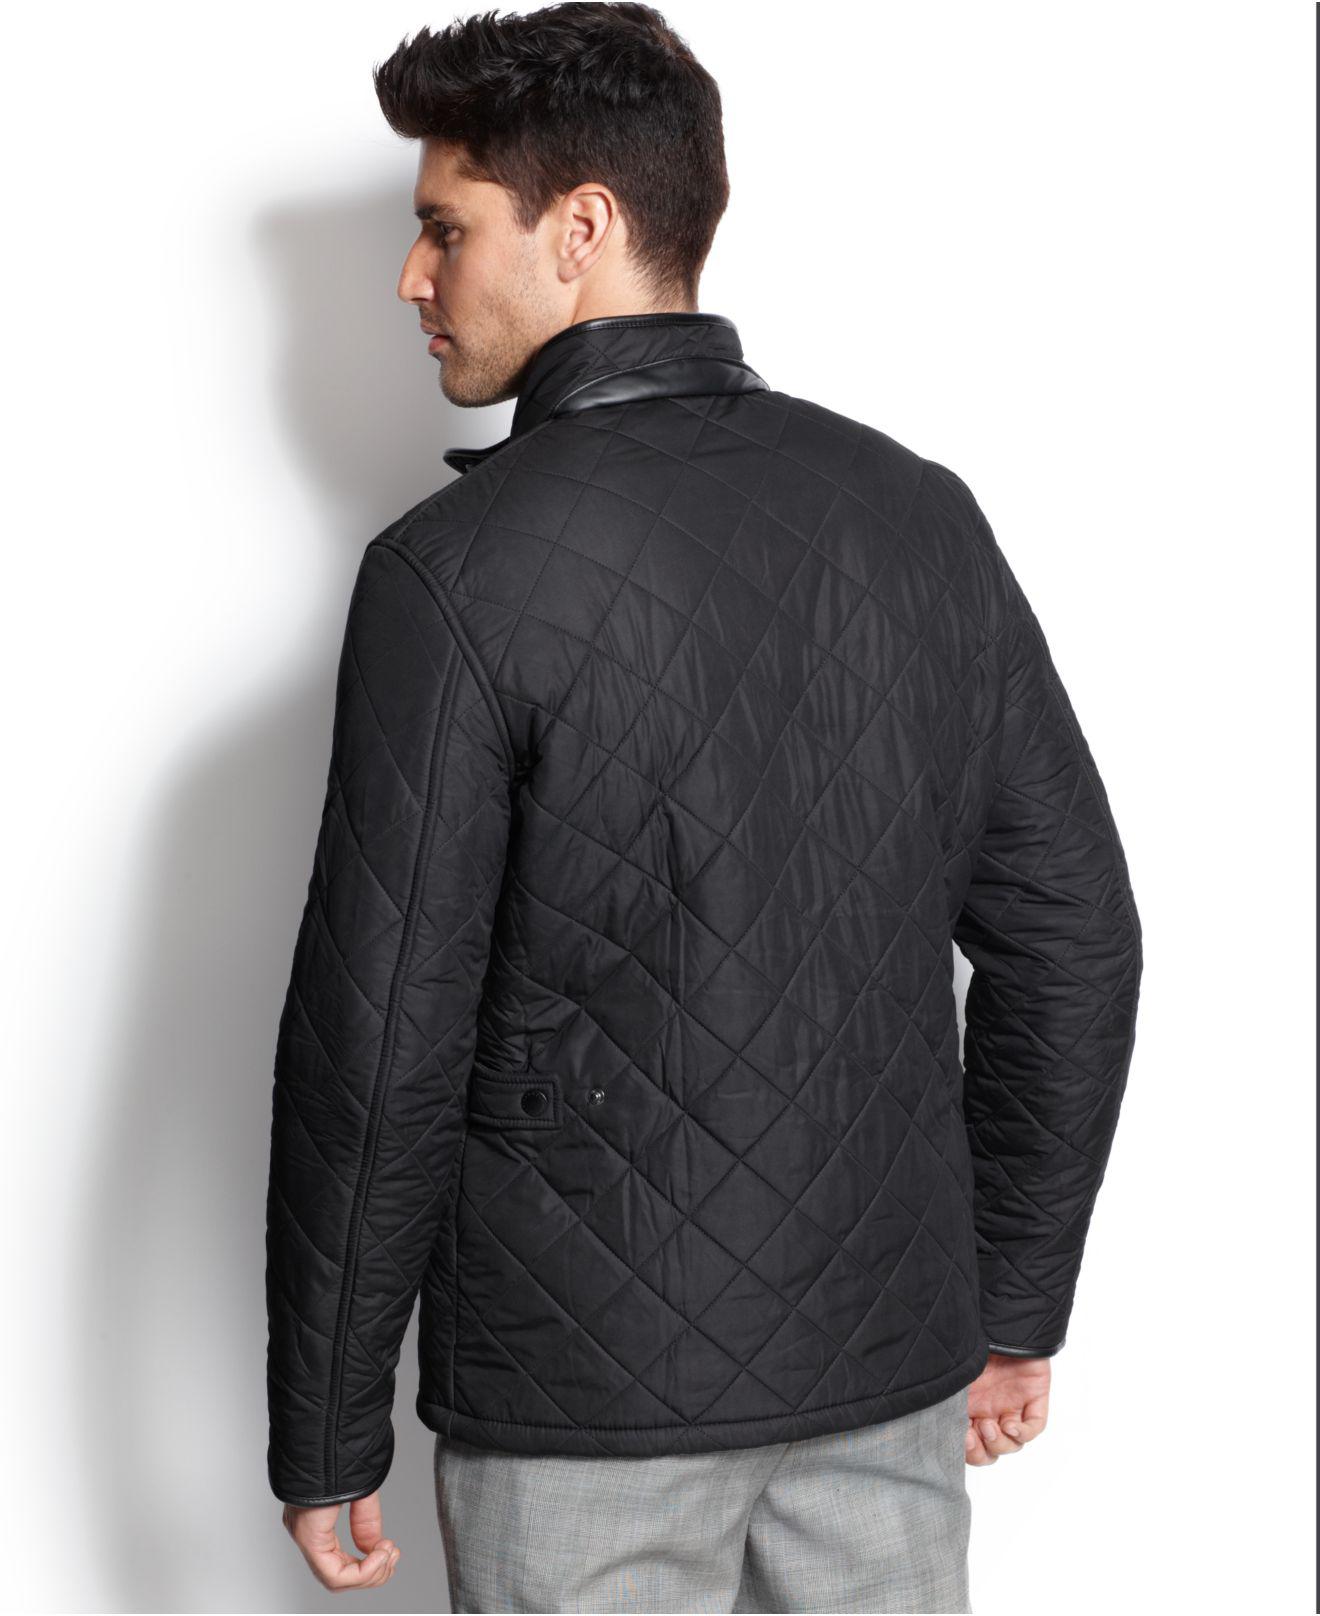 Barbour Corduroy Powell Quilted Jacket in Black for Men - Save 20% - Lyst